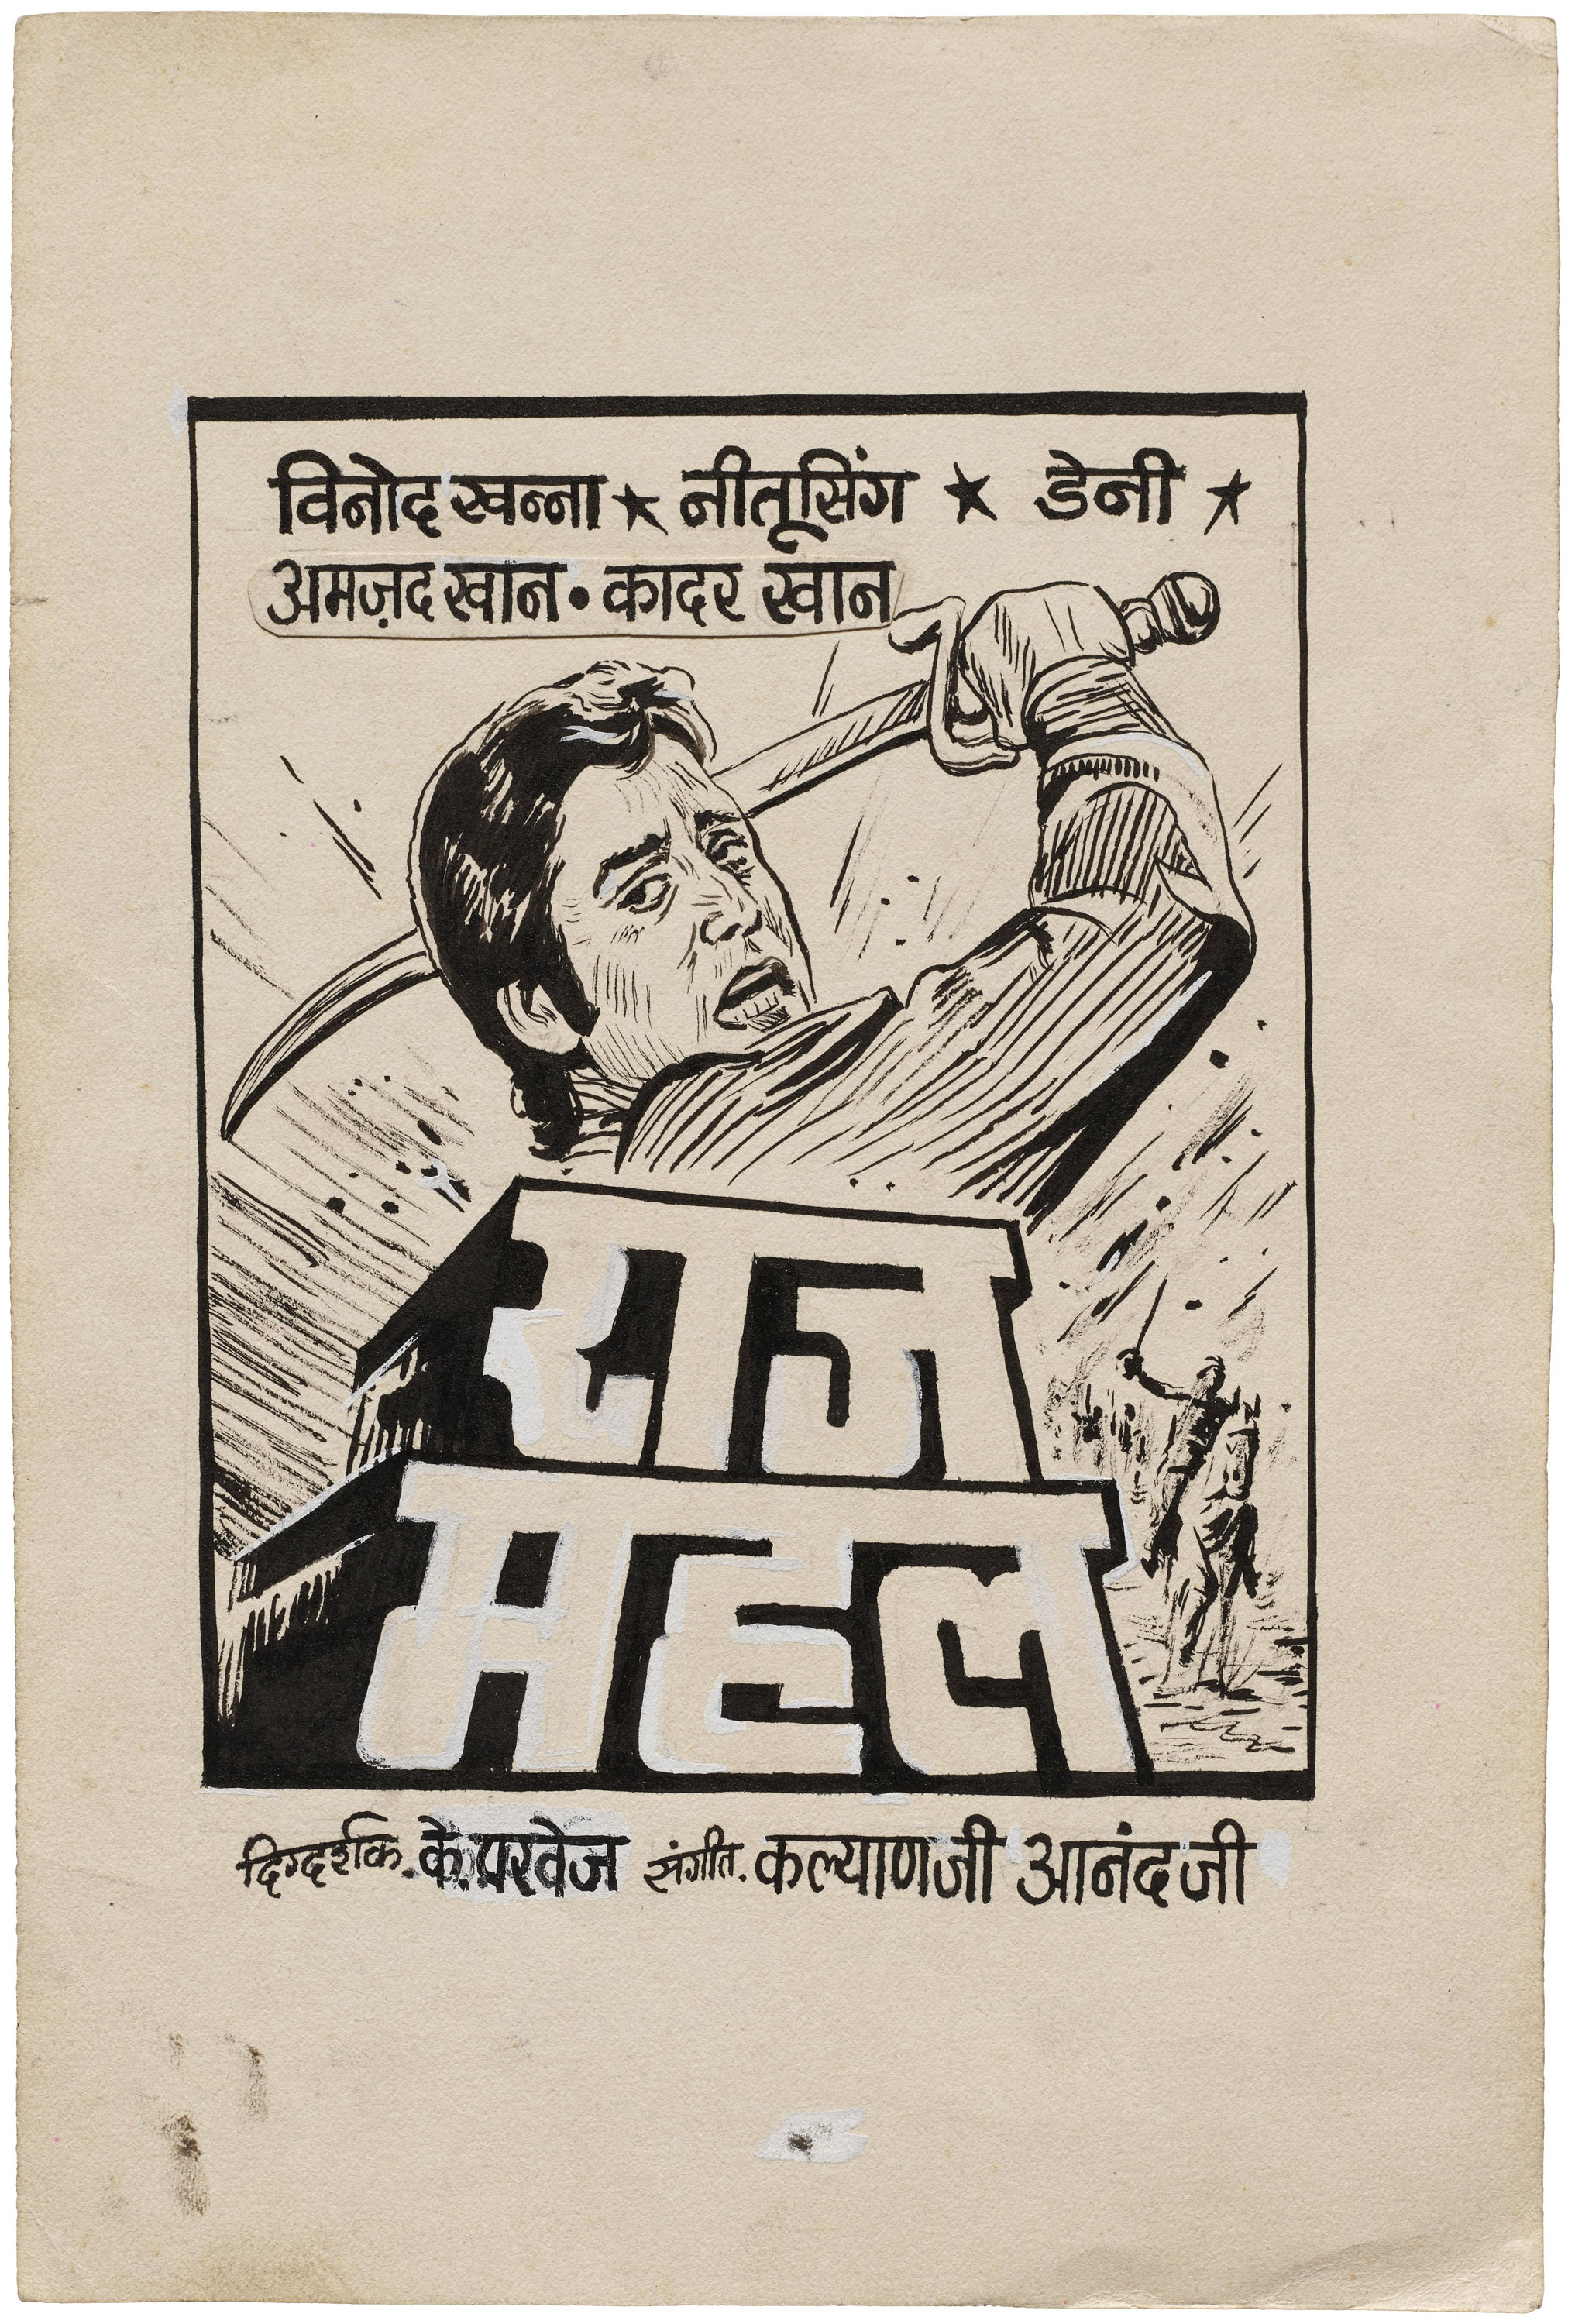 old indian movie posters